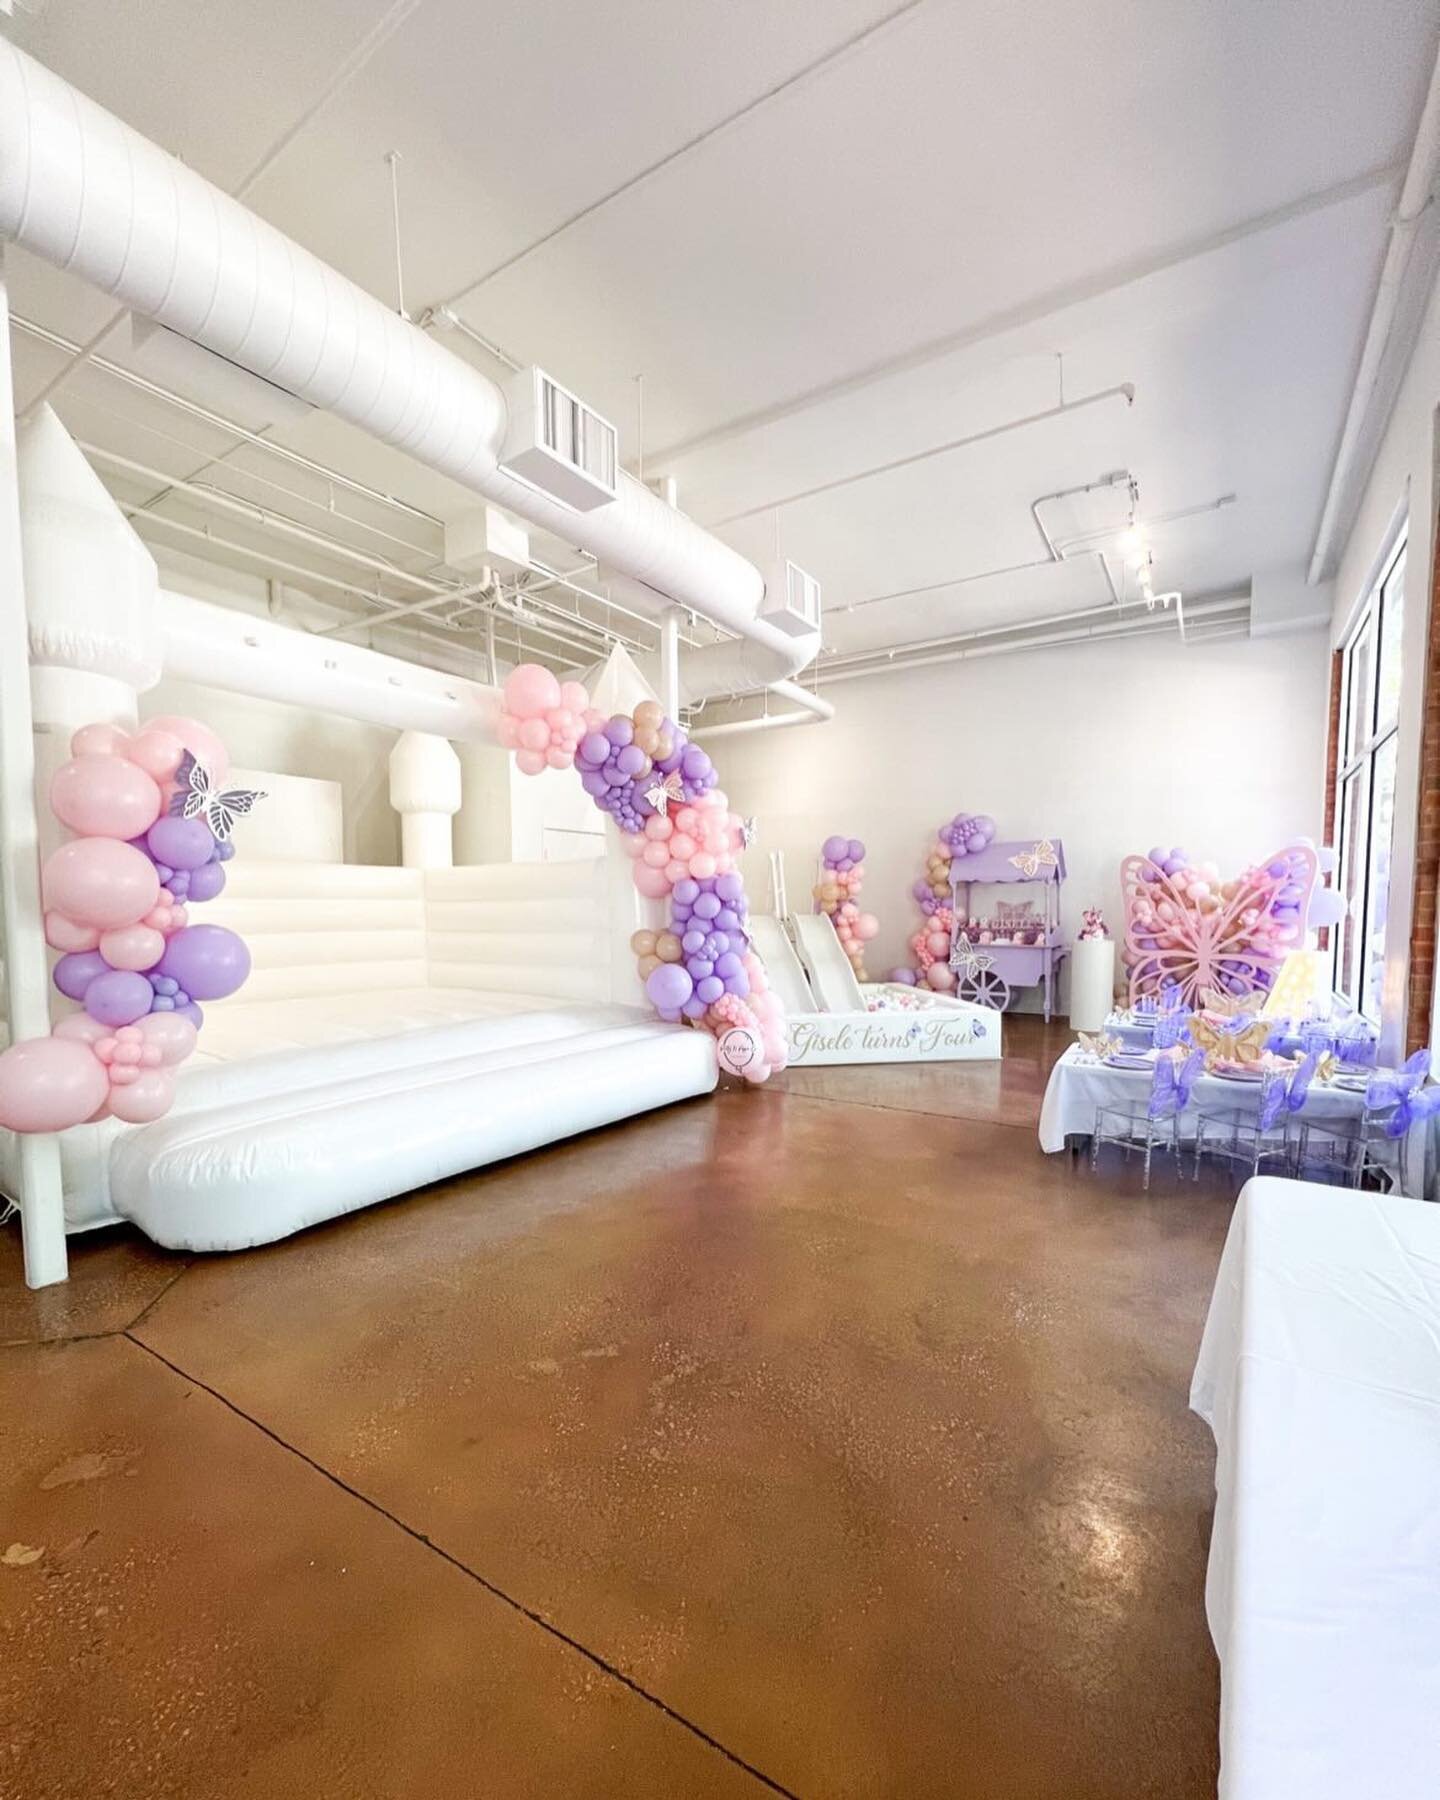 We&rsquo;re constantly blown away by the creativity in our space 😍💜

Party Planner: @atozchildrenevents
Balloons: @prettynpoppinco with @uniquedecordallas
Candy Cart: @partyhausrentals
Butterfly Prop: @atozchildrenevents
Ball Pit &amp; Slides: @ato